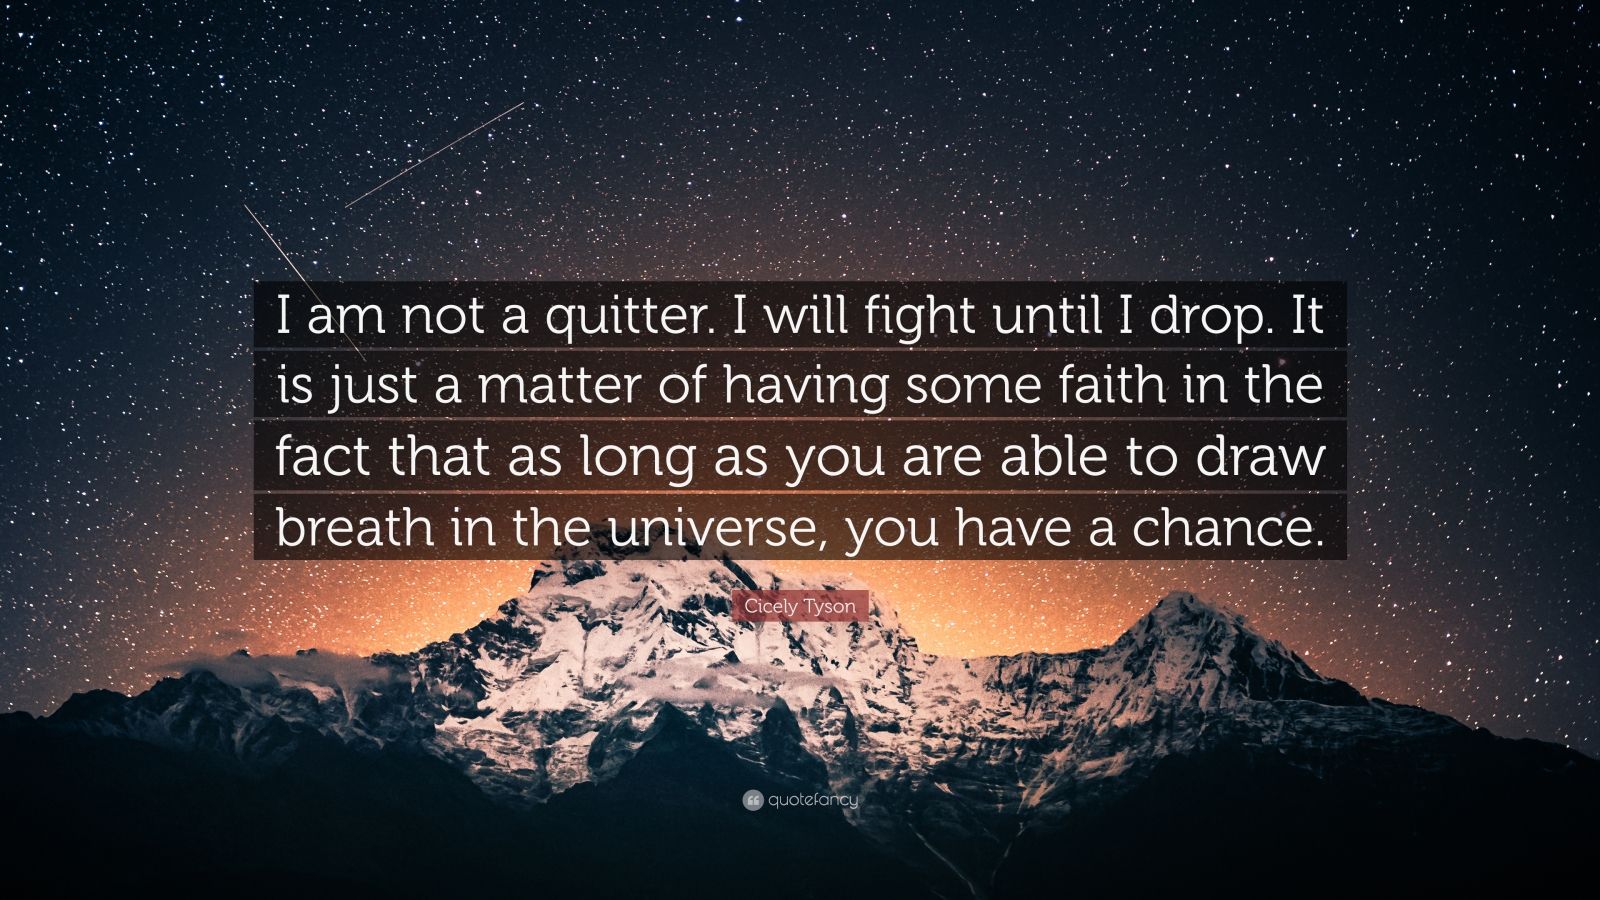 Cicely Tyson Quote: "I am not a quitter. I will fight ...